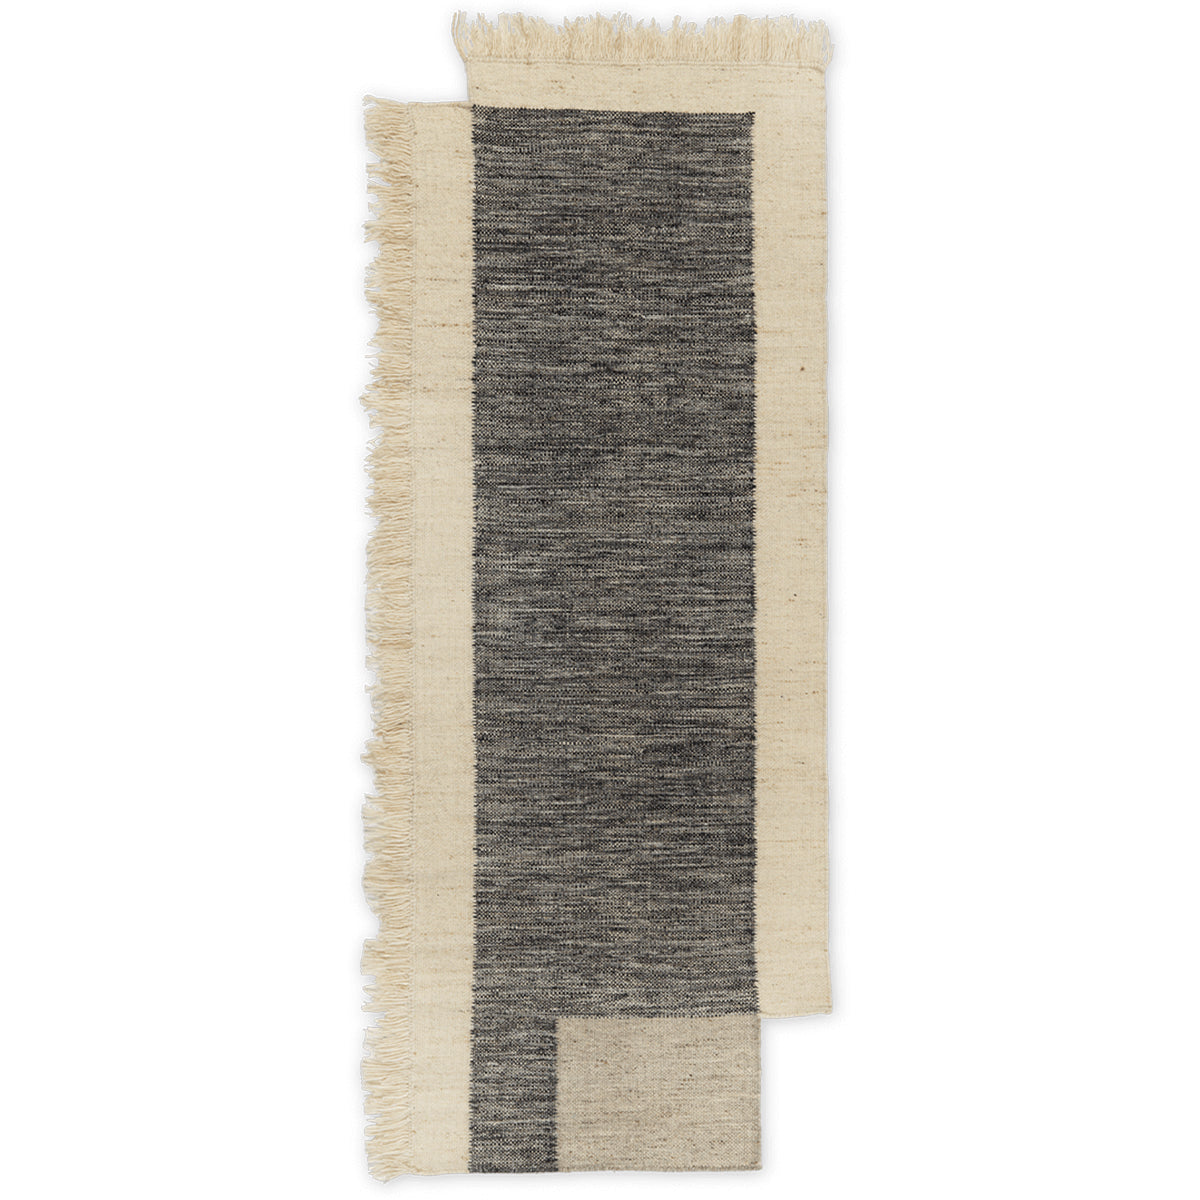 Counter Rug - Charcoal/Off-white